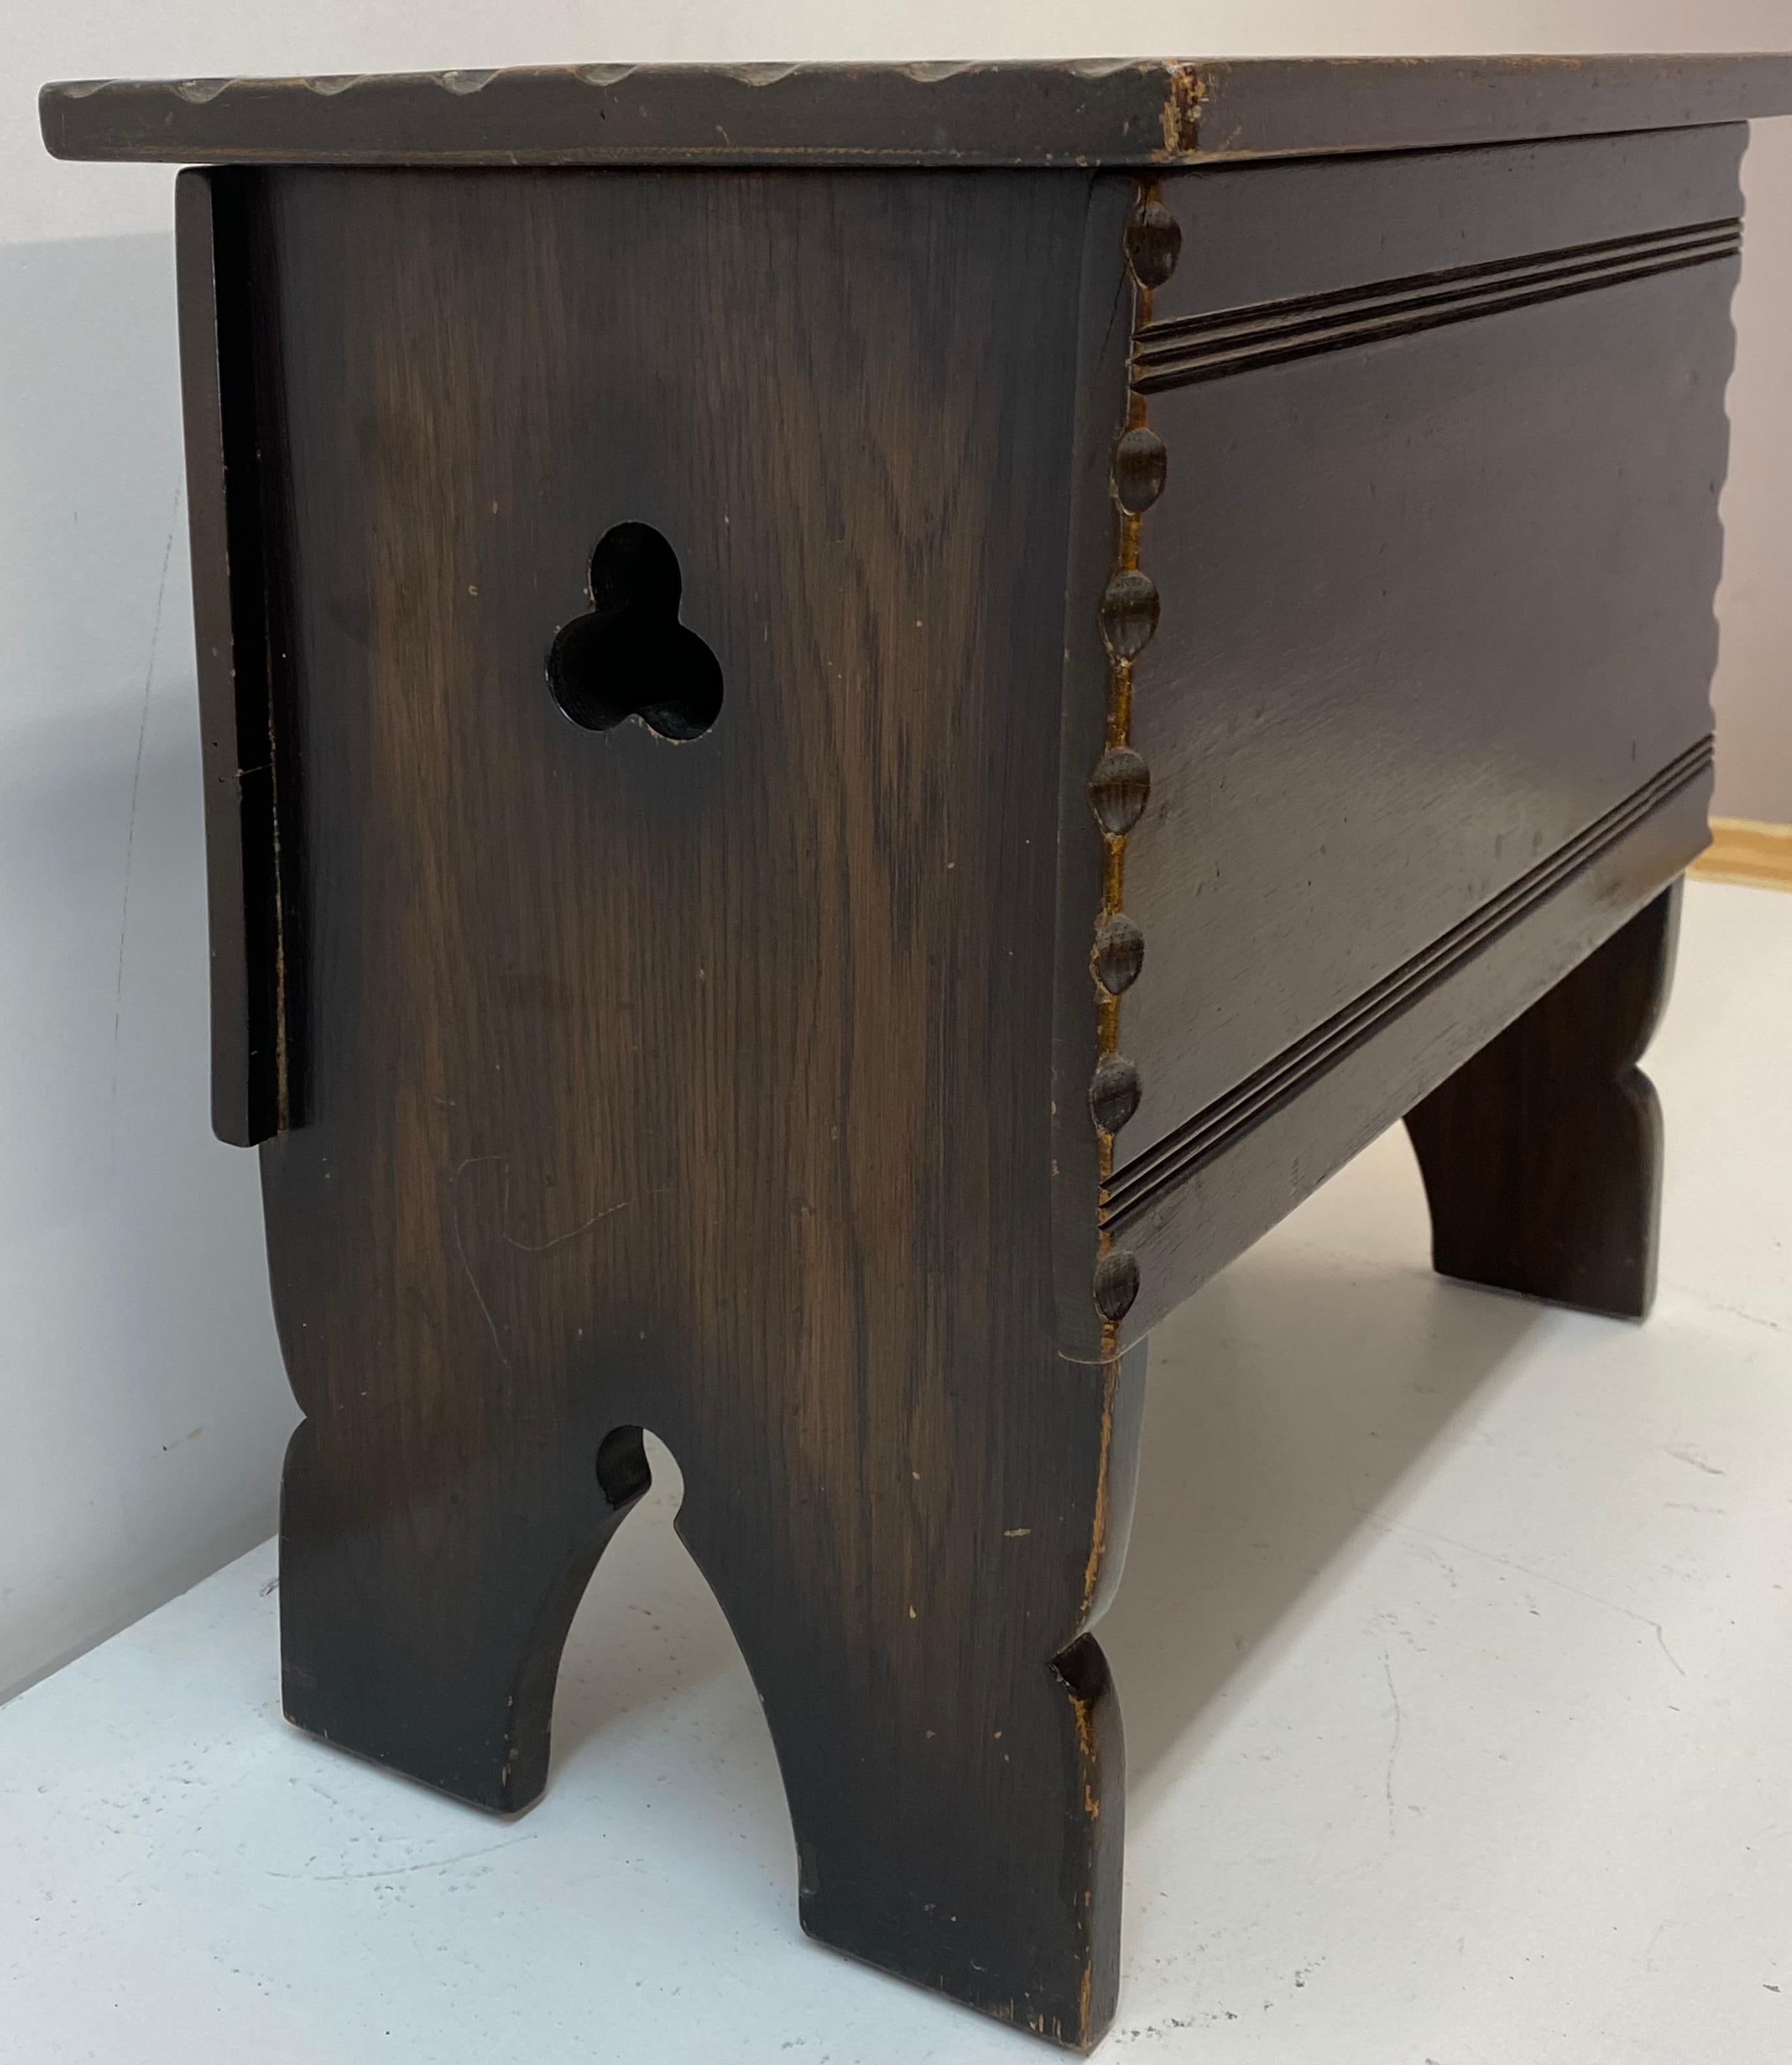 Hand-Crafted 19th Century Lift Top Storage Box / Seat